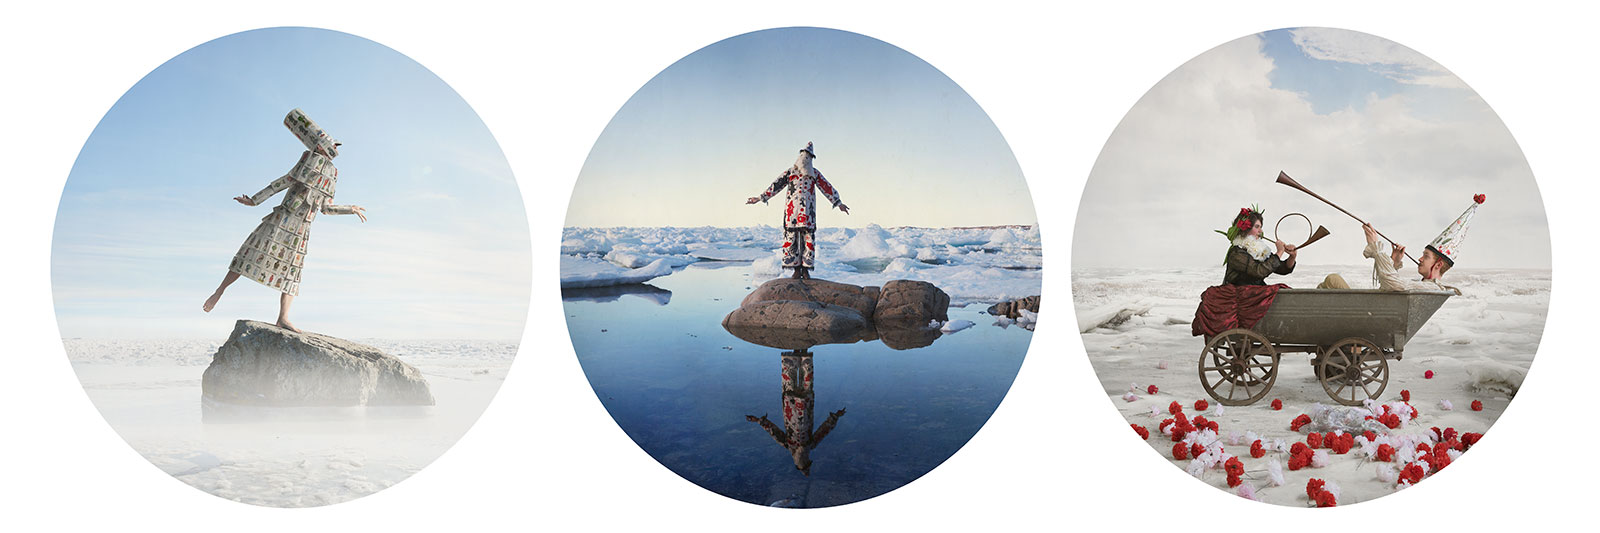 Circus characters in polar landscapes